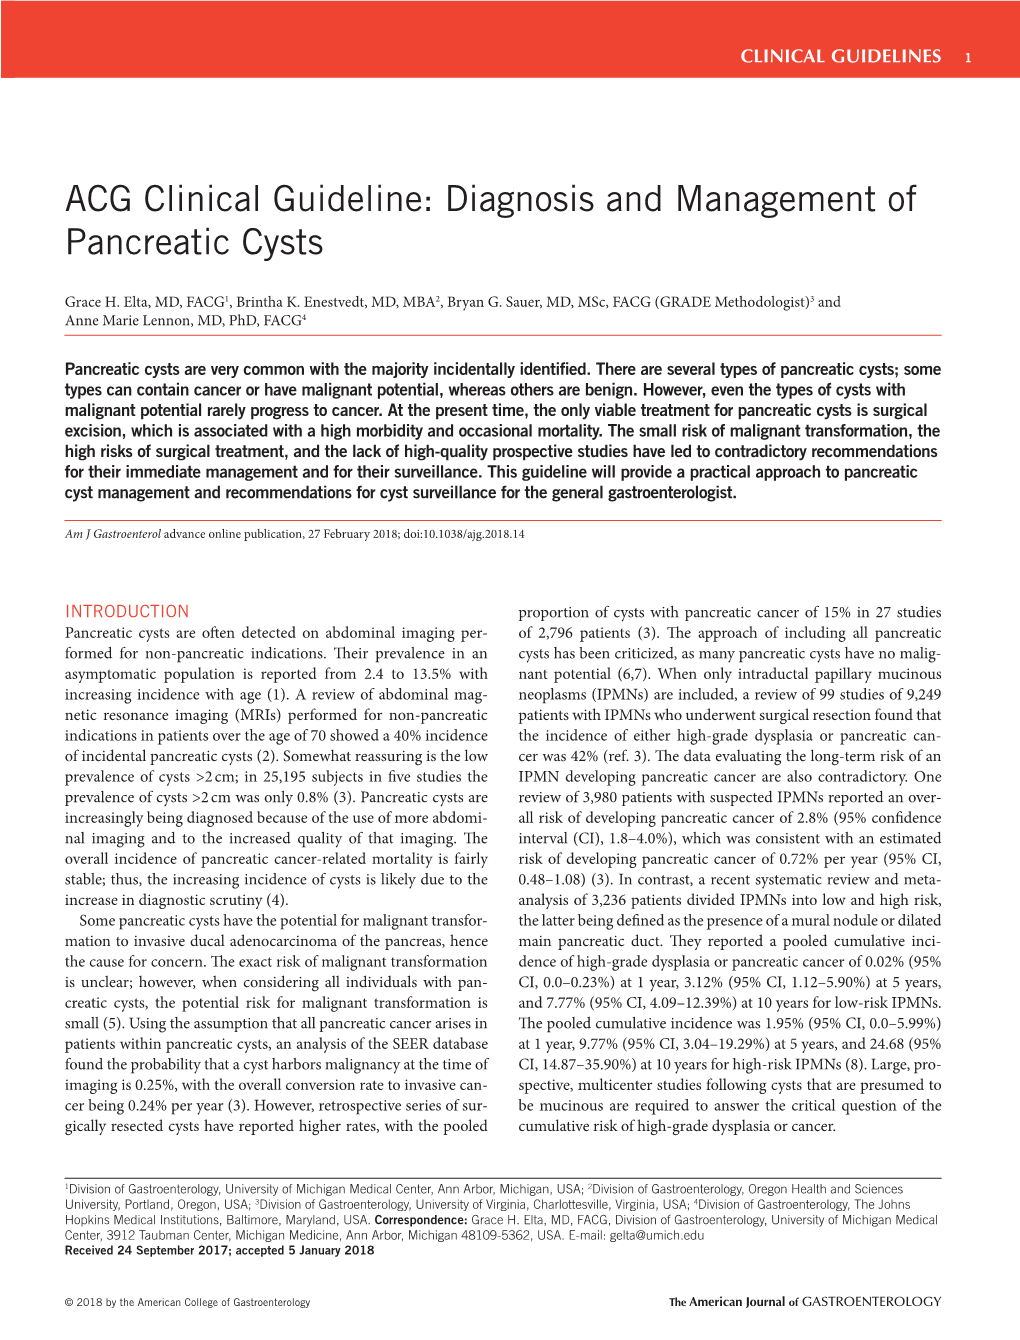 ACG Clinical Guideline: Diagnosis and Management of Pancreatic Cysts